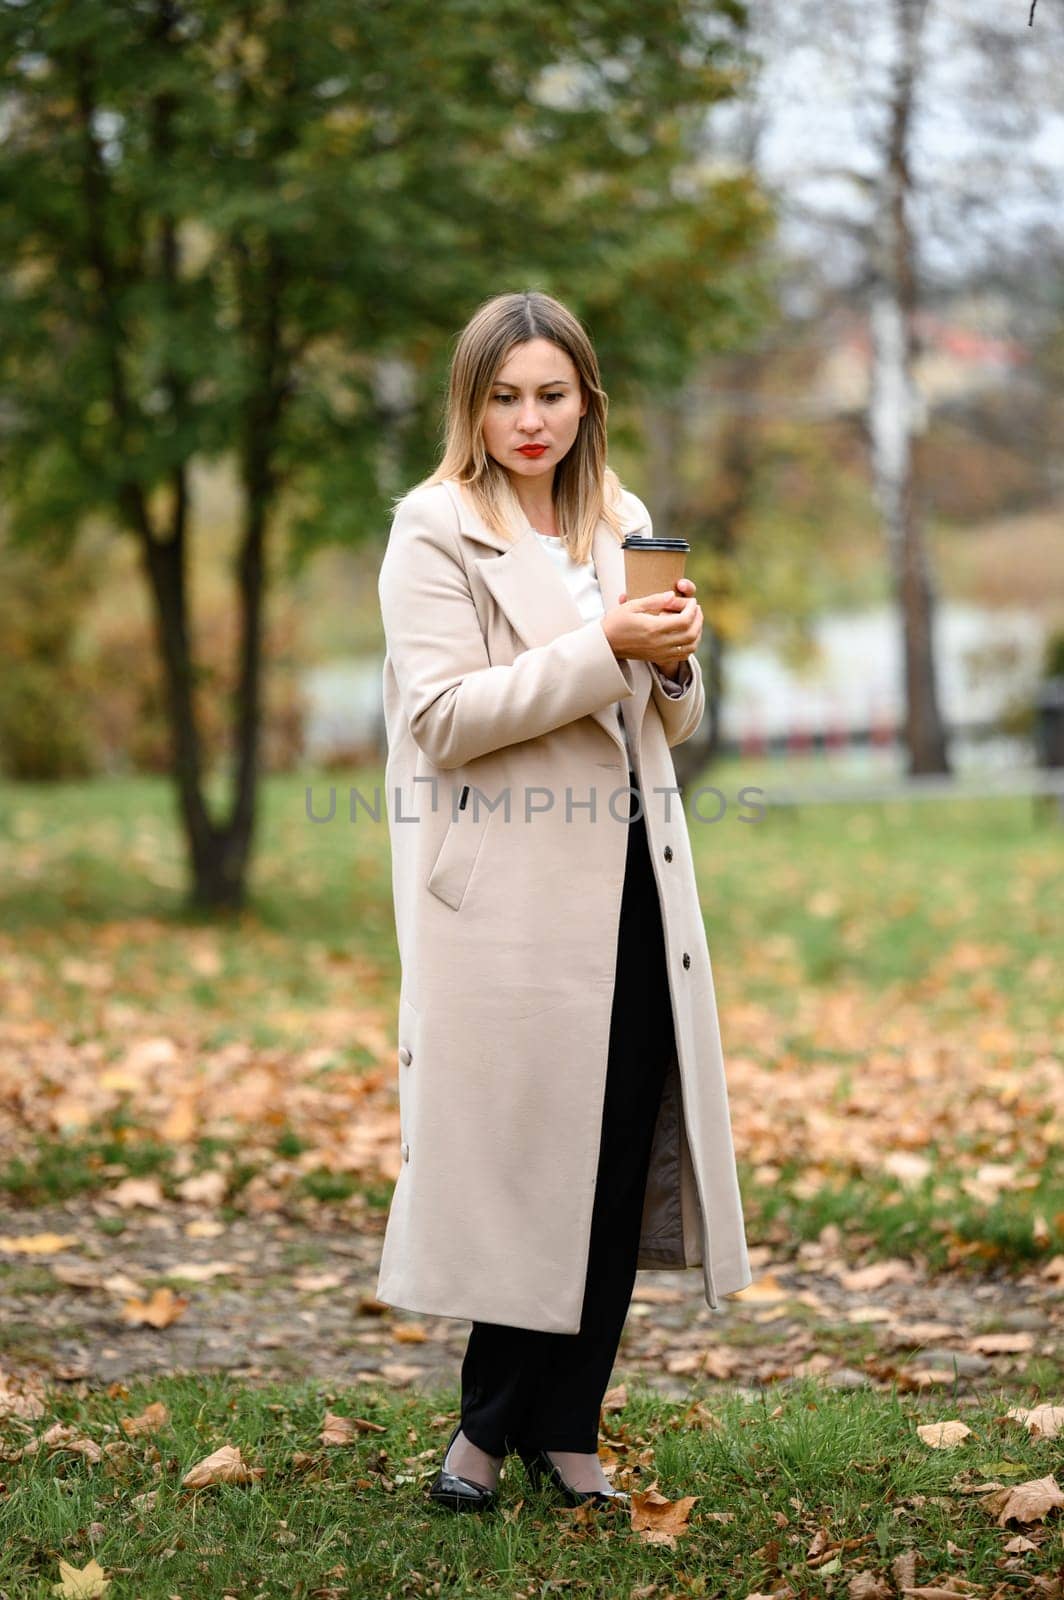 A young girl in a long autumn coat drinks coffee in an autumn park. by Niko_Cingaryuk